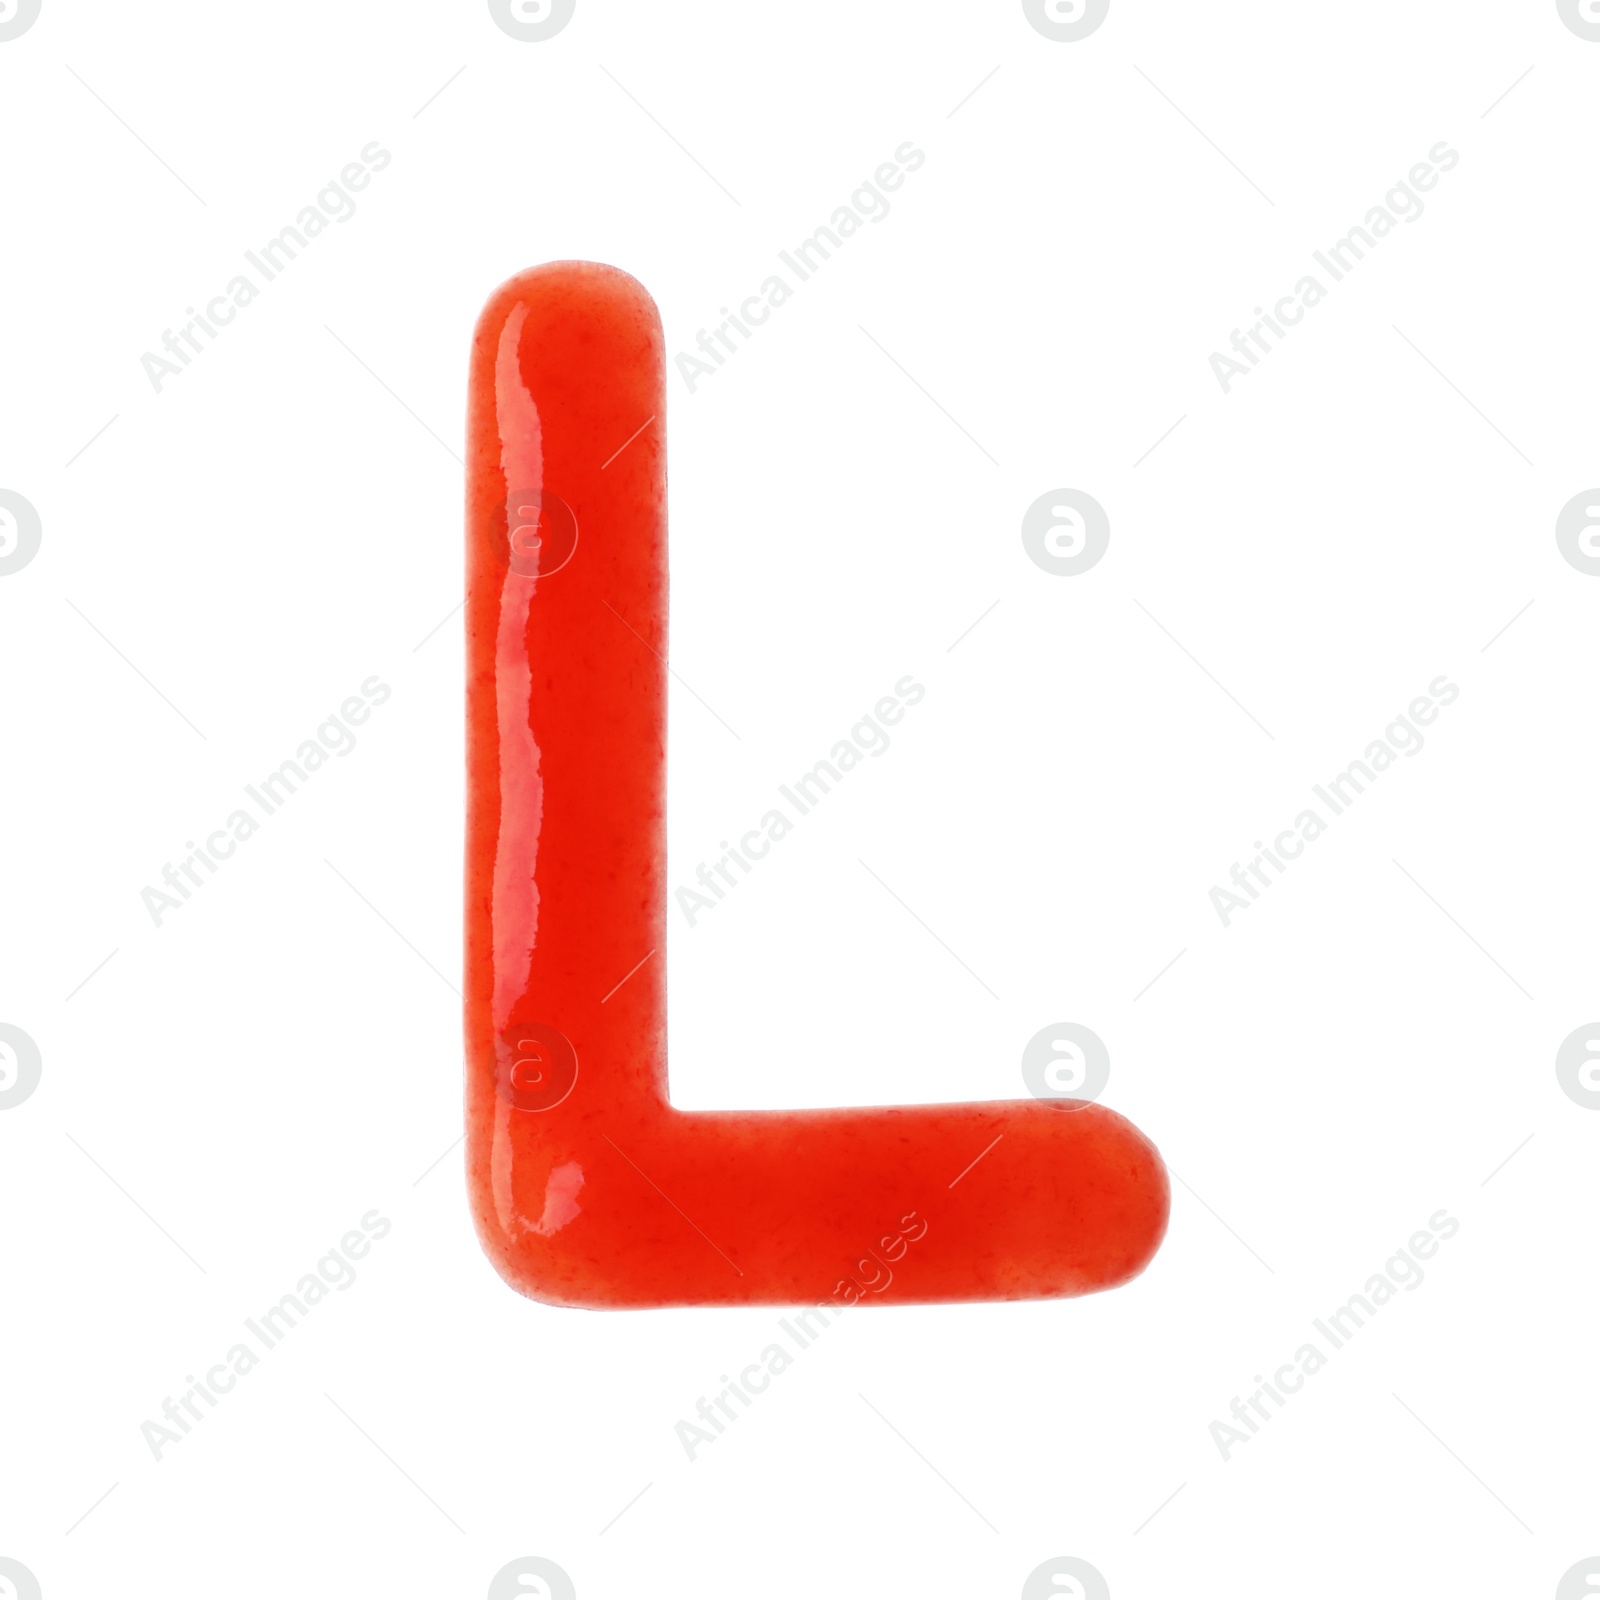 Photo of Letter L written with red sauce on white background